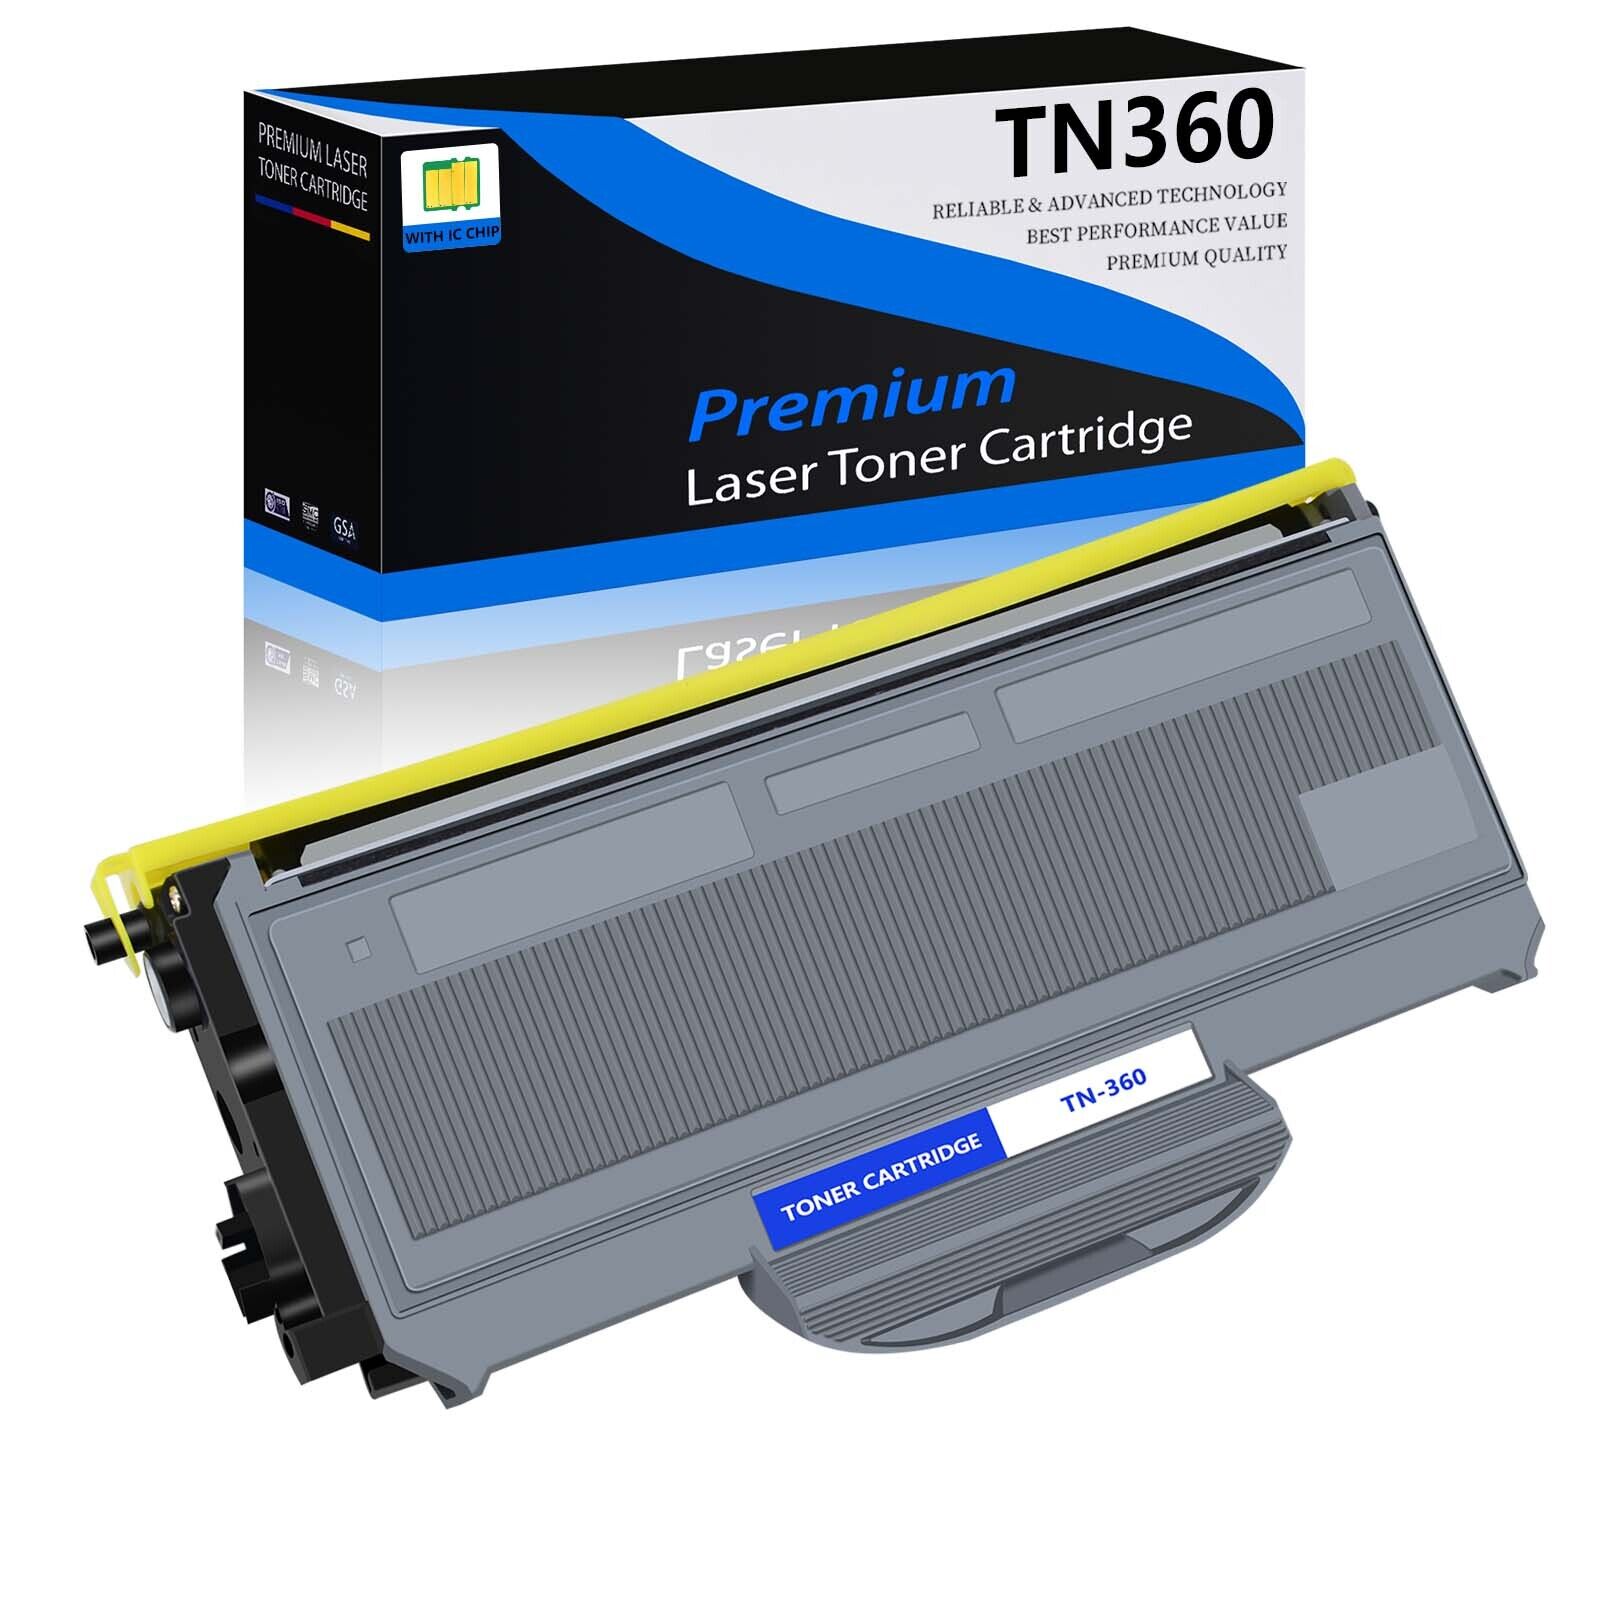 TN360 330 Toner Cartridge DR360 Drum for Brother HL-2140 2170W MFC-7340 7840W